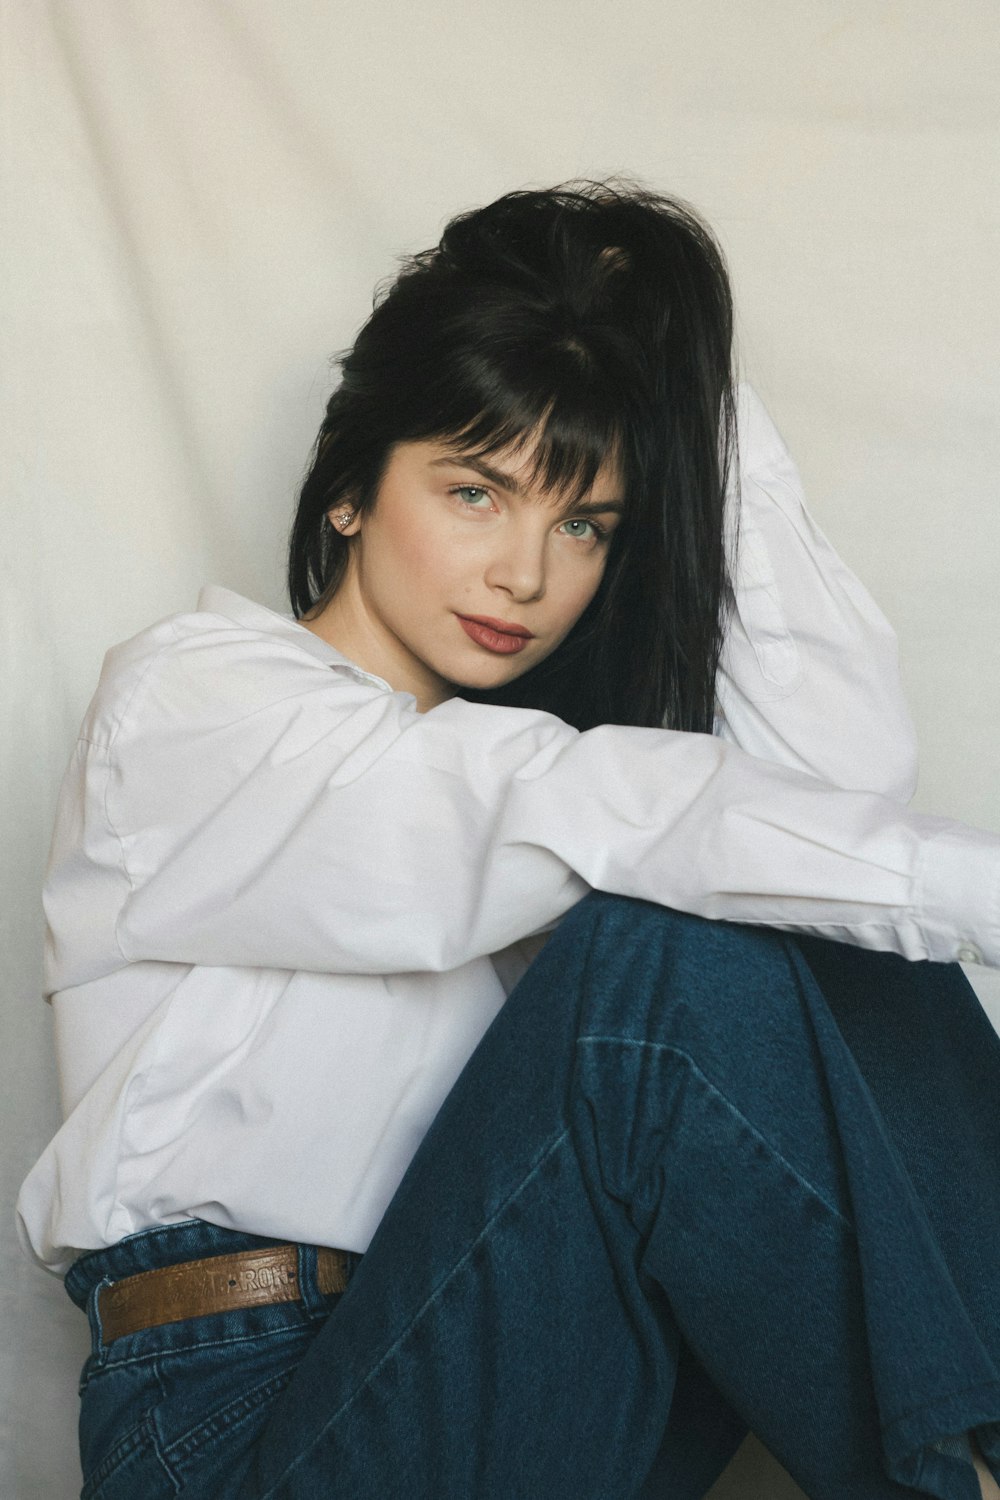 a woman sitting on the ground wearing a white shirt and jeans